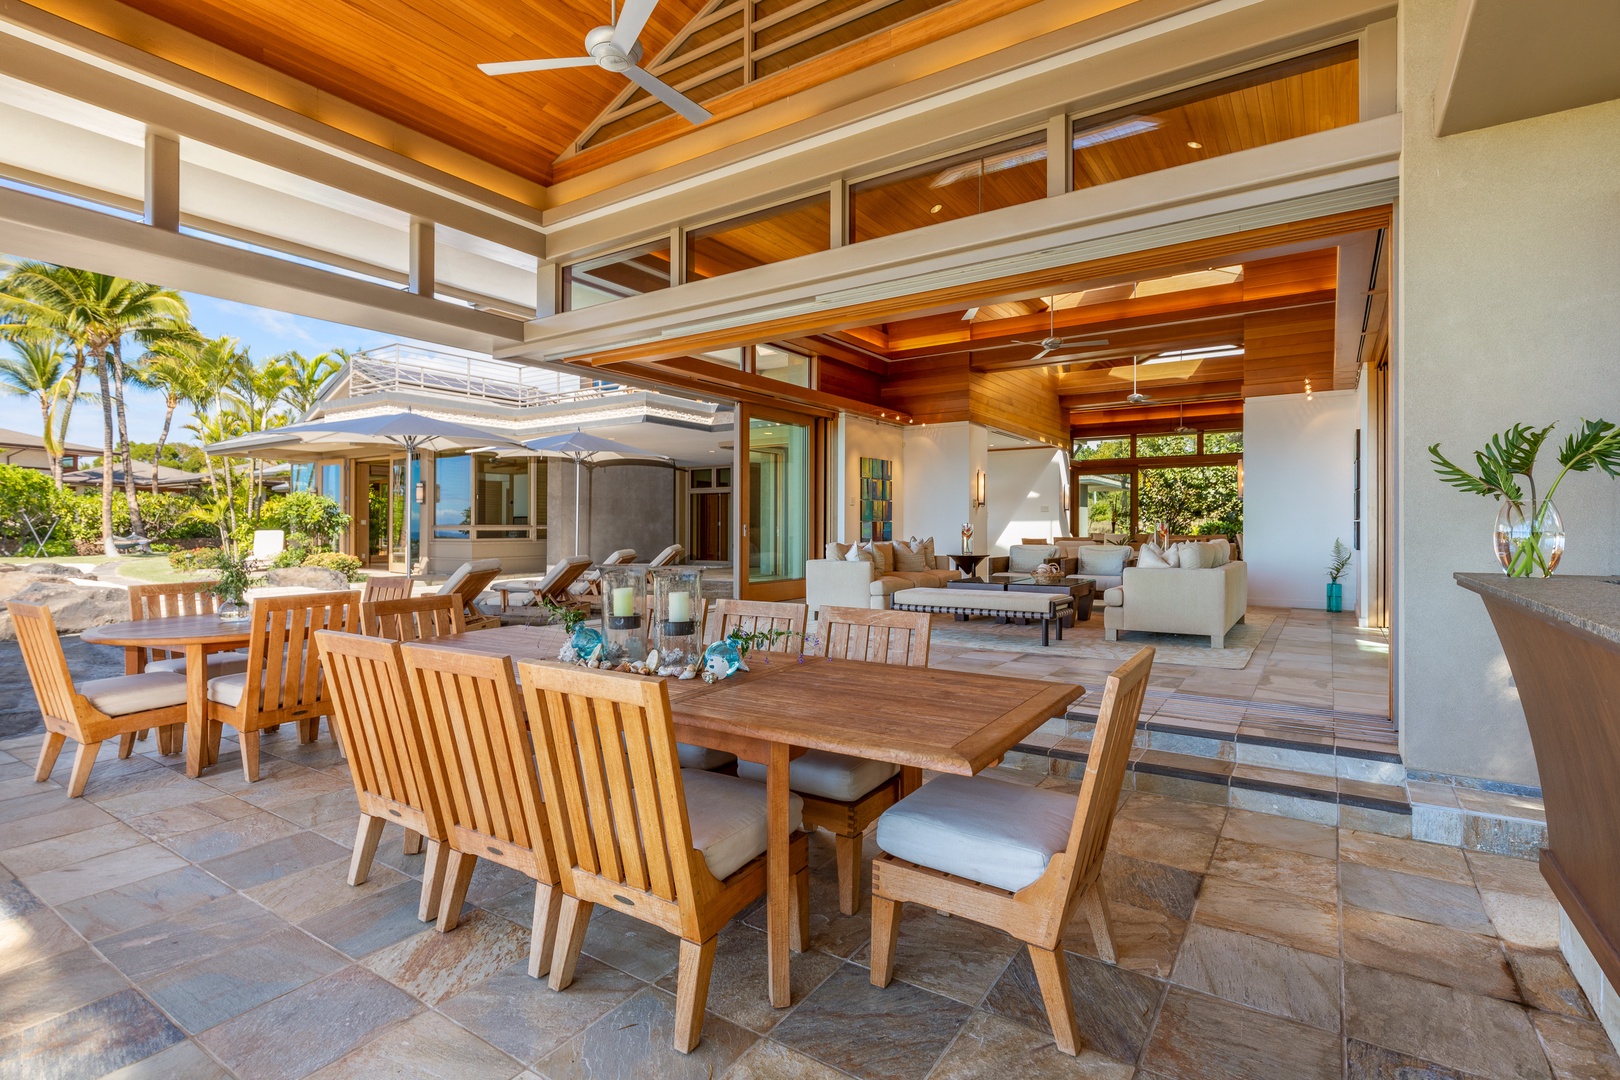 Kamuela Vacation Rentals, Mauna Kea Resort Bluffs 22 - The Beach House - Dining area with plenty of seating for all